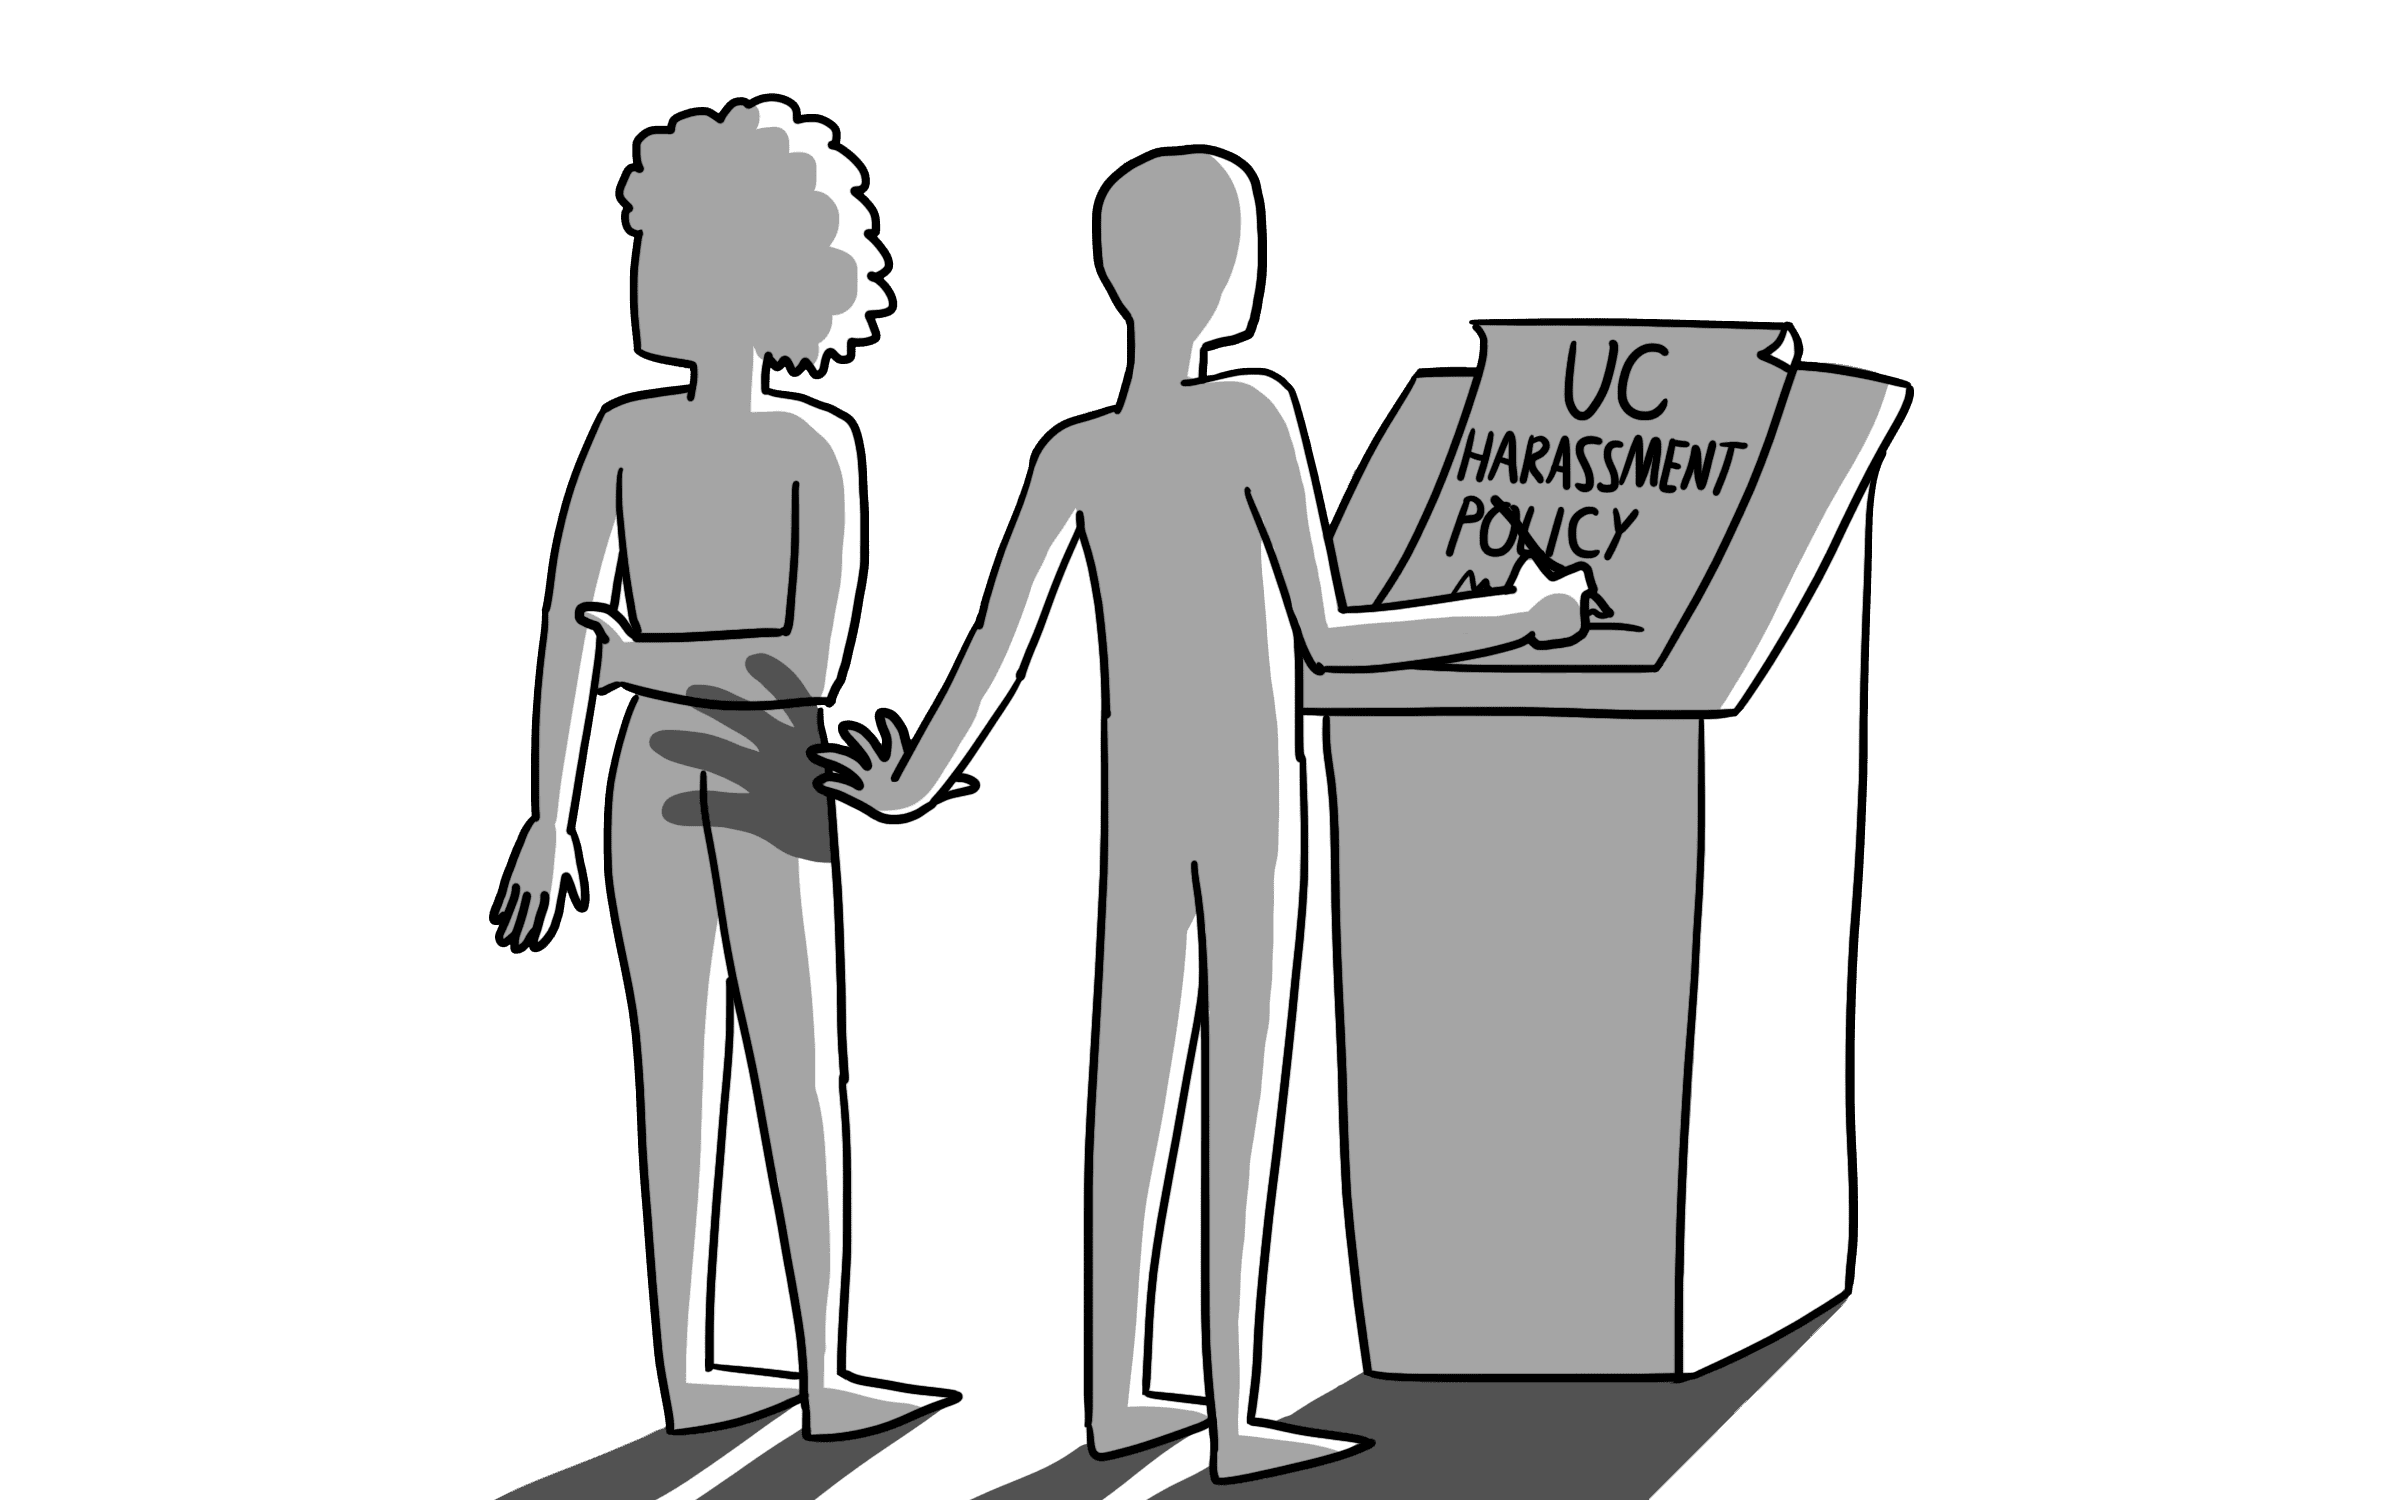 By Failing to Hold Their Own Accountable, UC Regents Set Poor Standard on Sexual Crimes